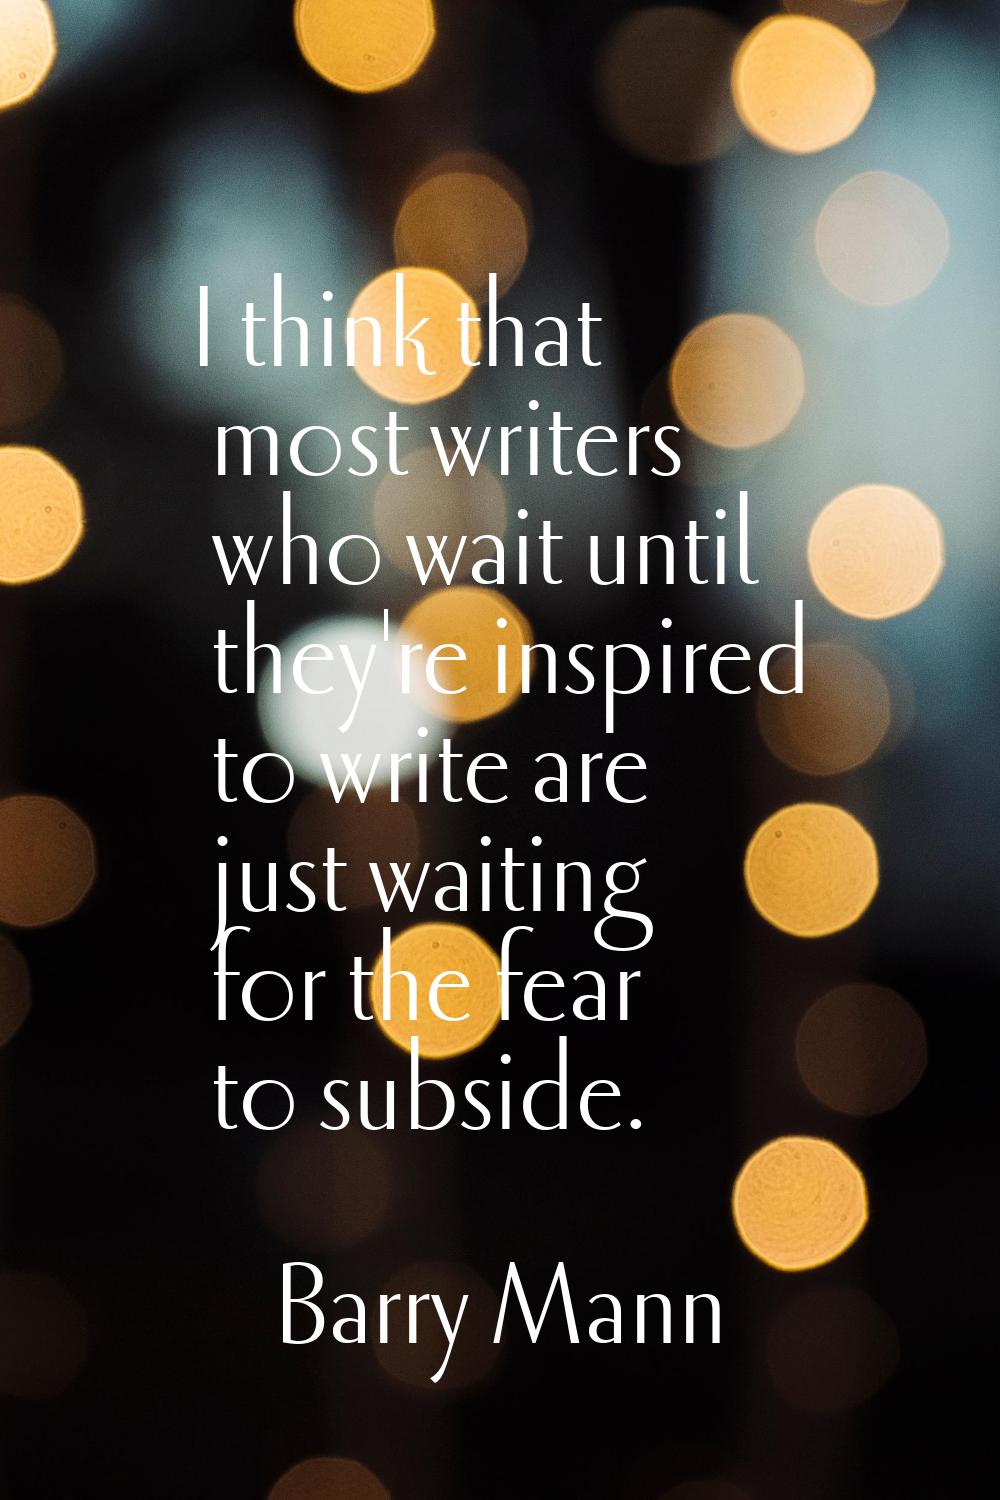 I think that most writers who wait until they're inspired to write are just waiting for the fear to